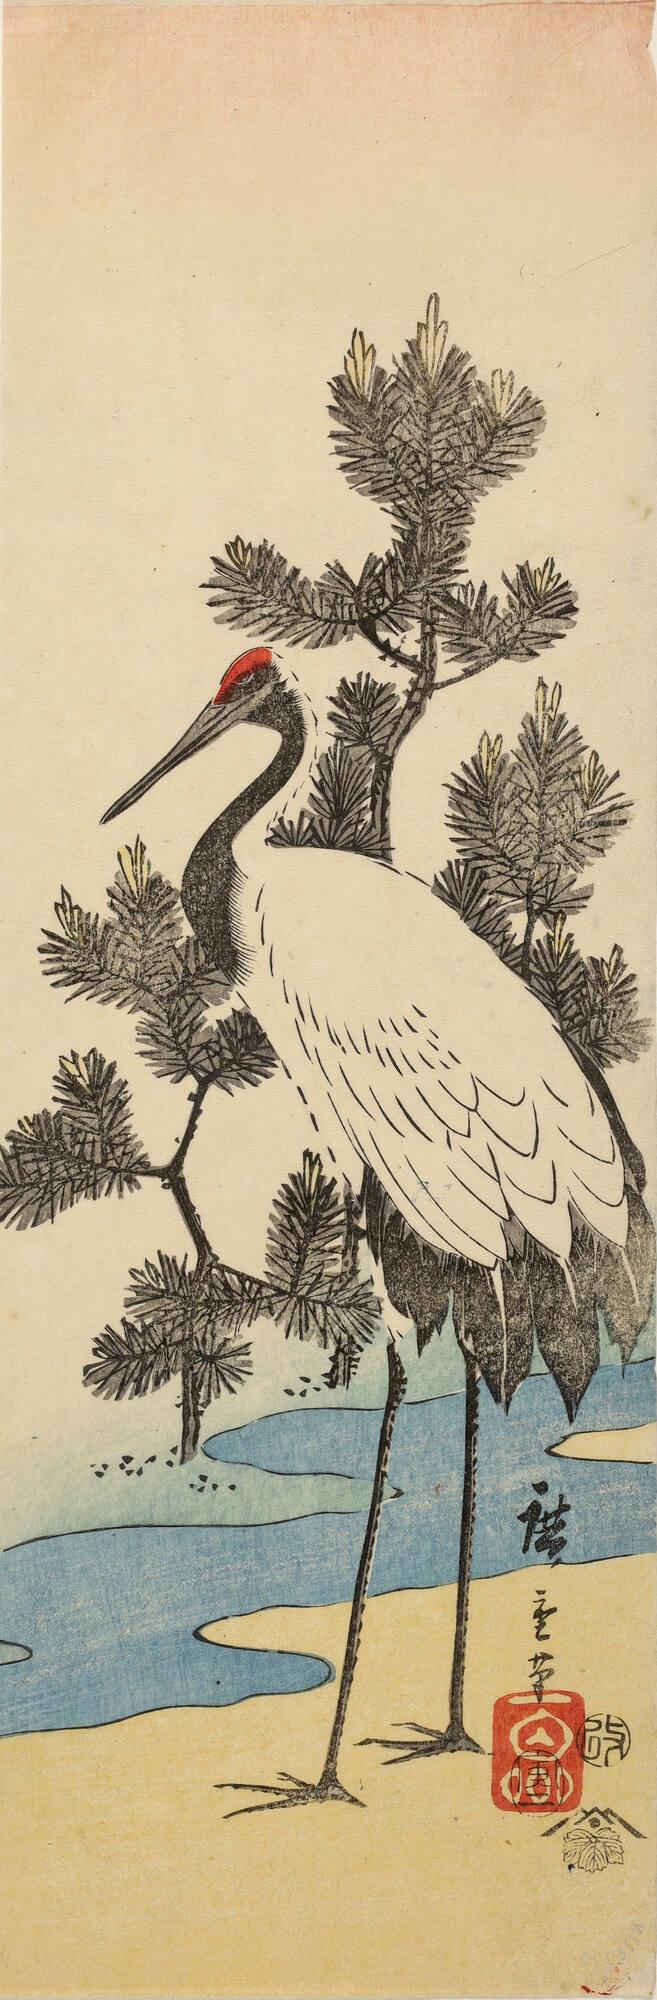 Crane and Pines by a Stream